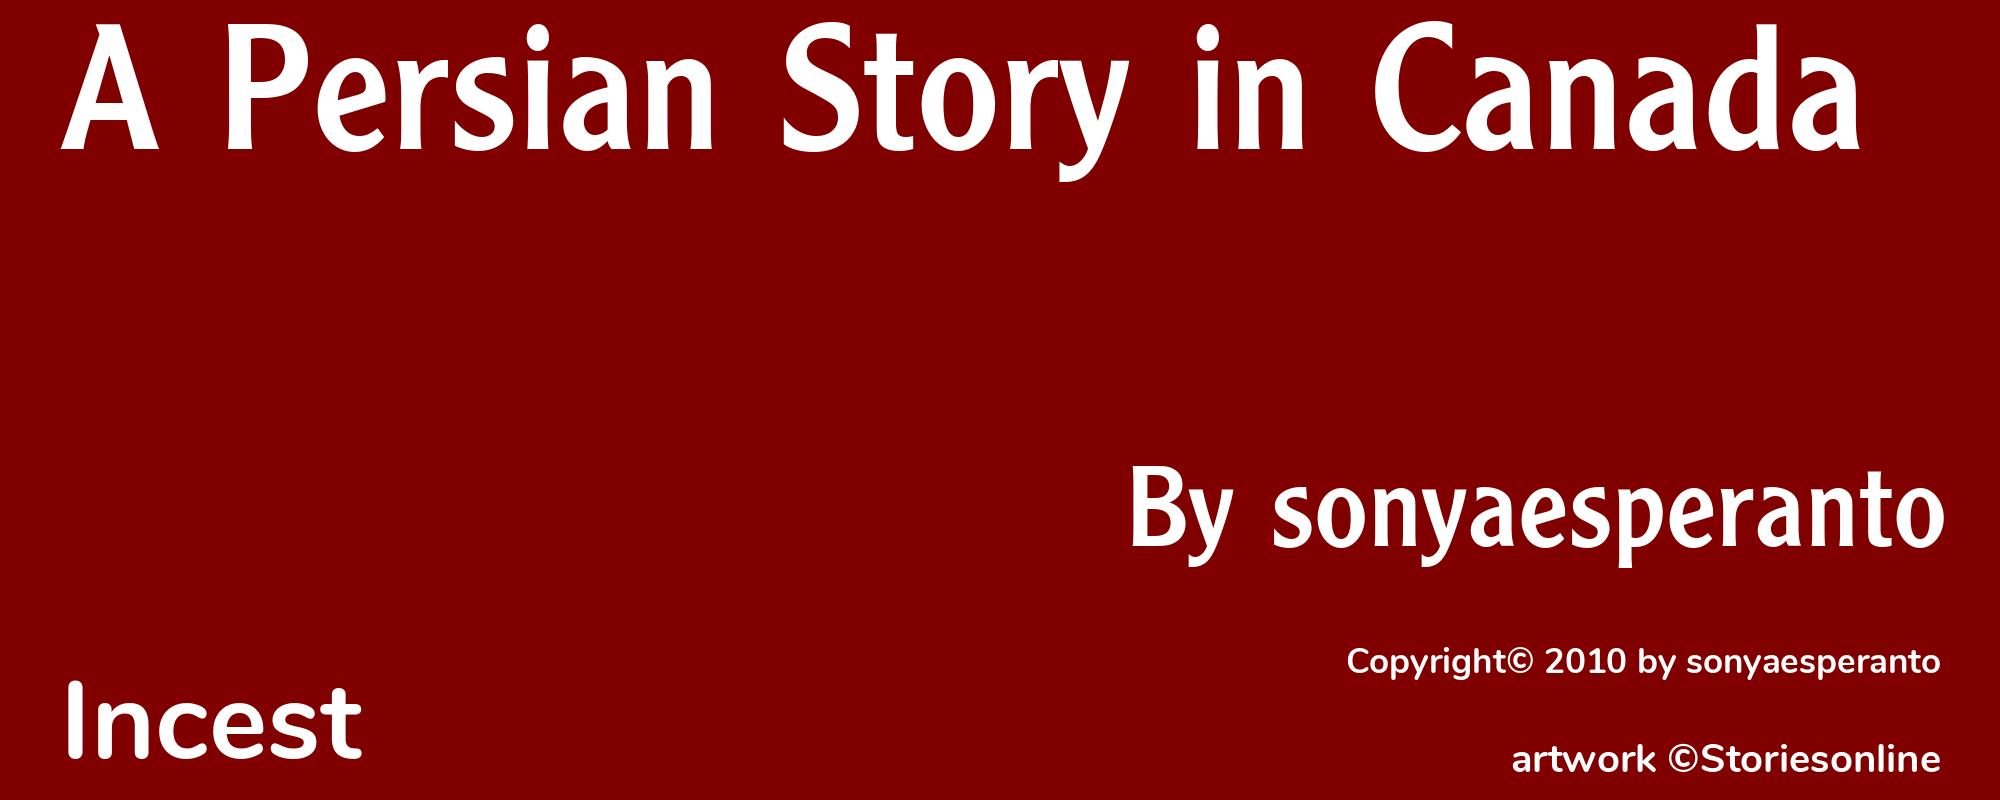 A Persian Story in Canada - Cover